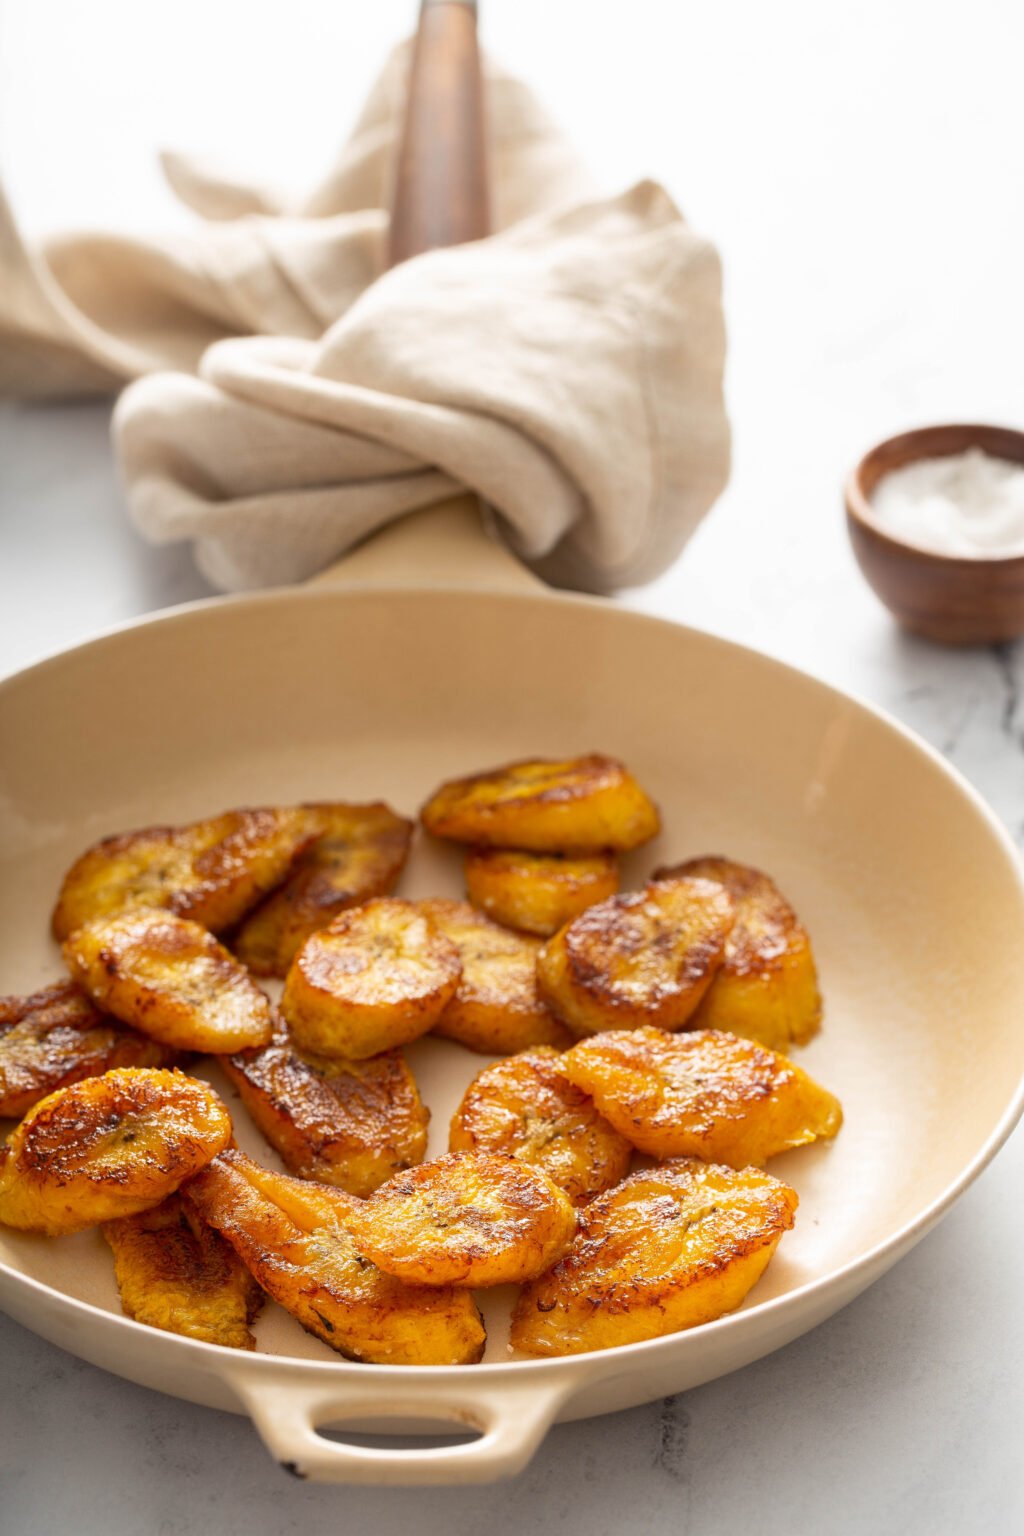 Puerto Rican Fried Plantains | Quick & Easy Sweet Plantains Recipe